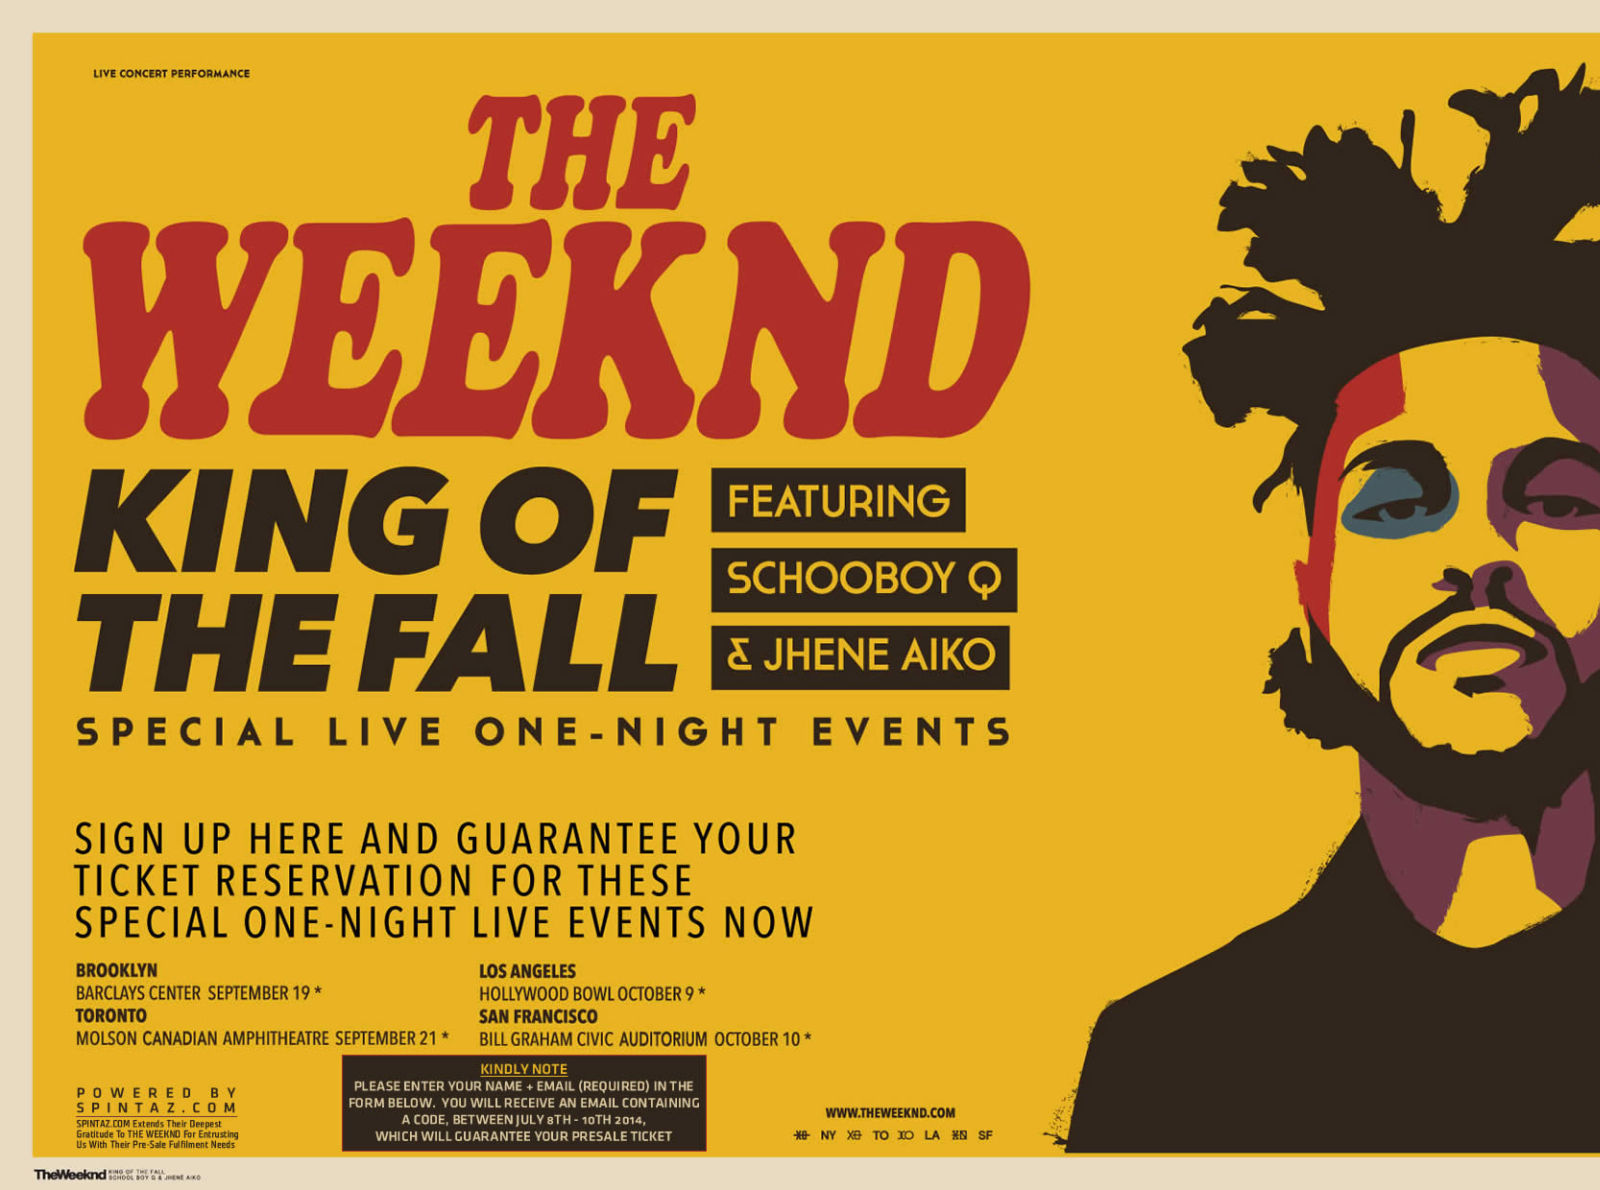 Weekend concerts. The Weeknd poster. The Weeknd плакат. Концерт the Weeknd. Плакат концерта.